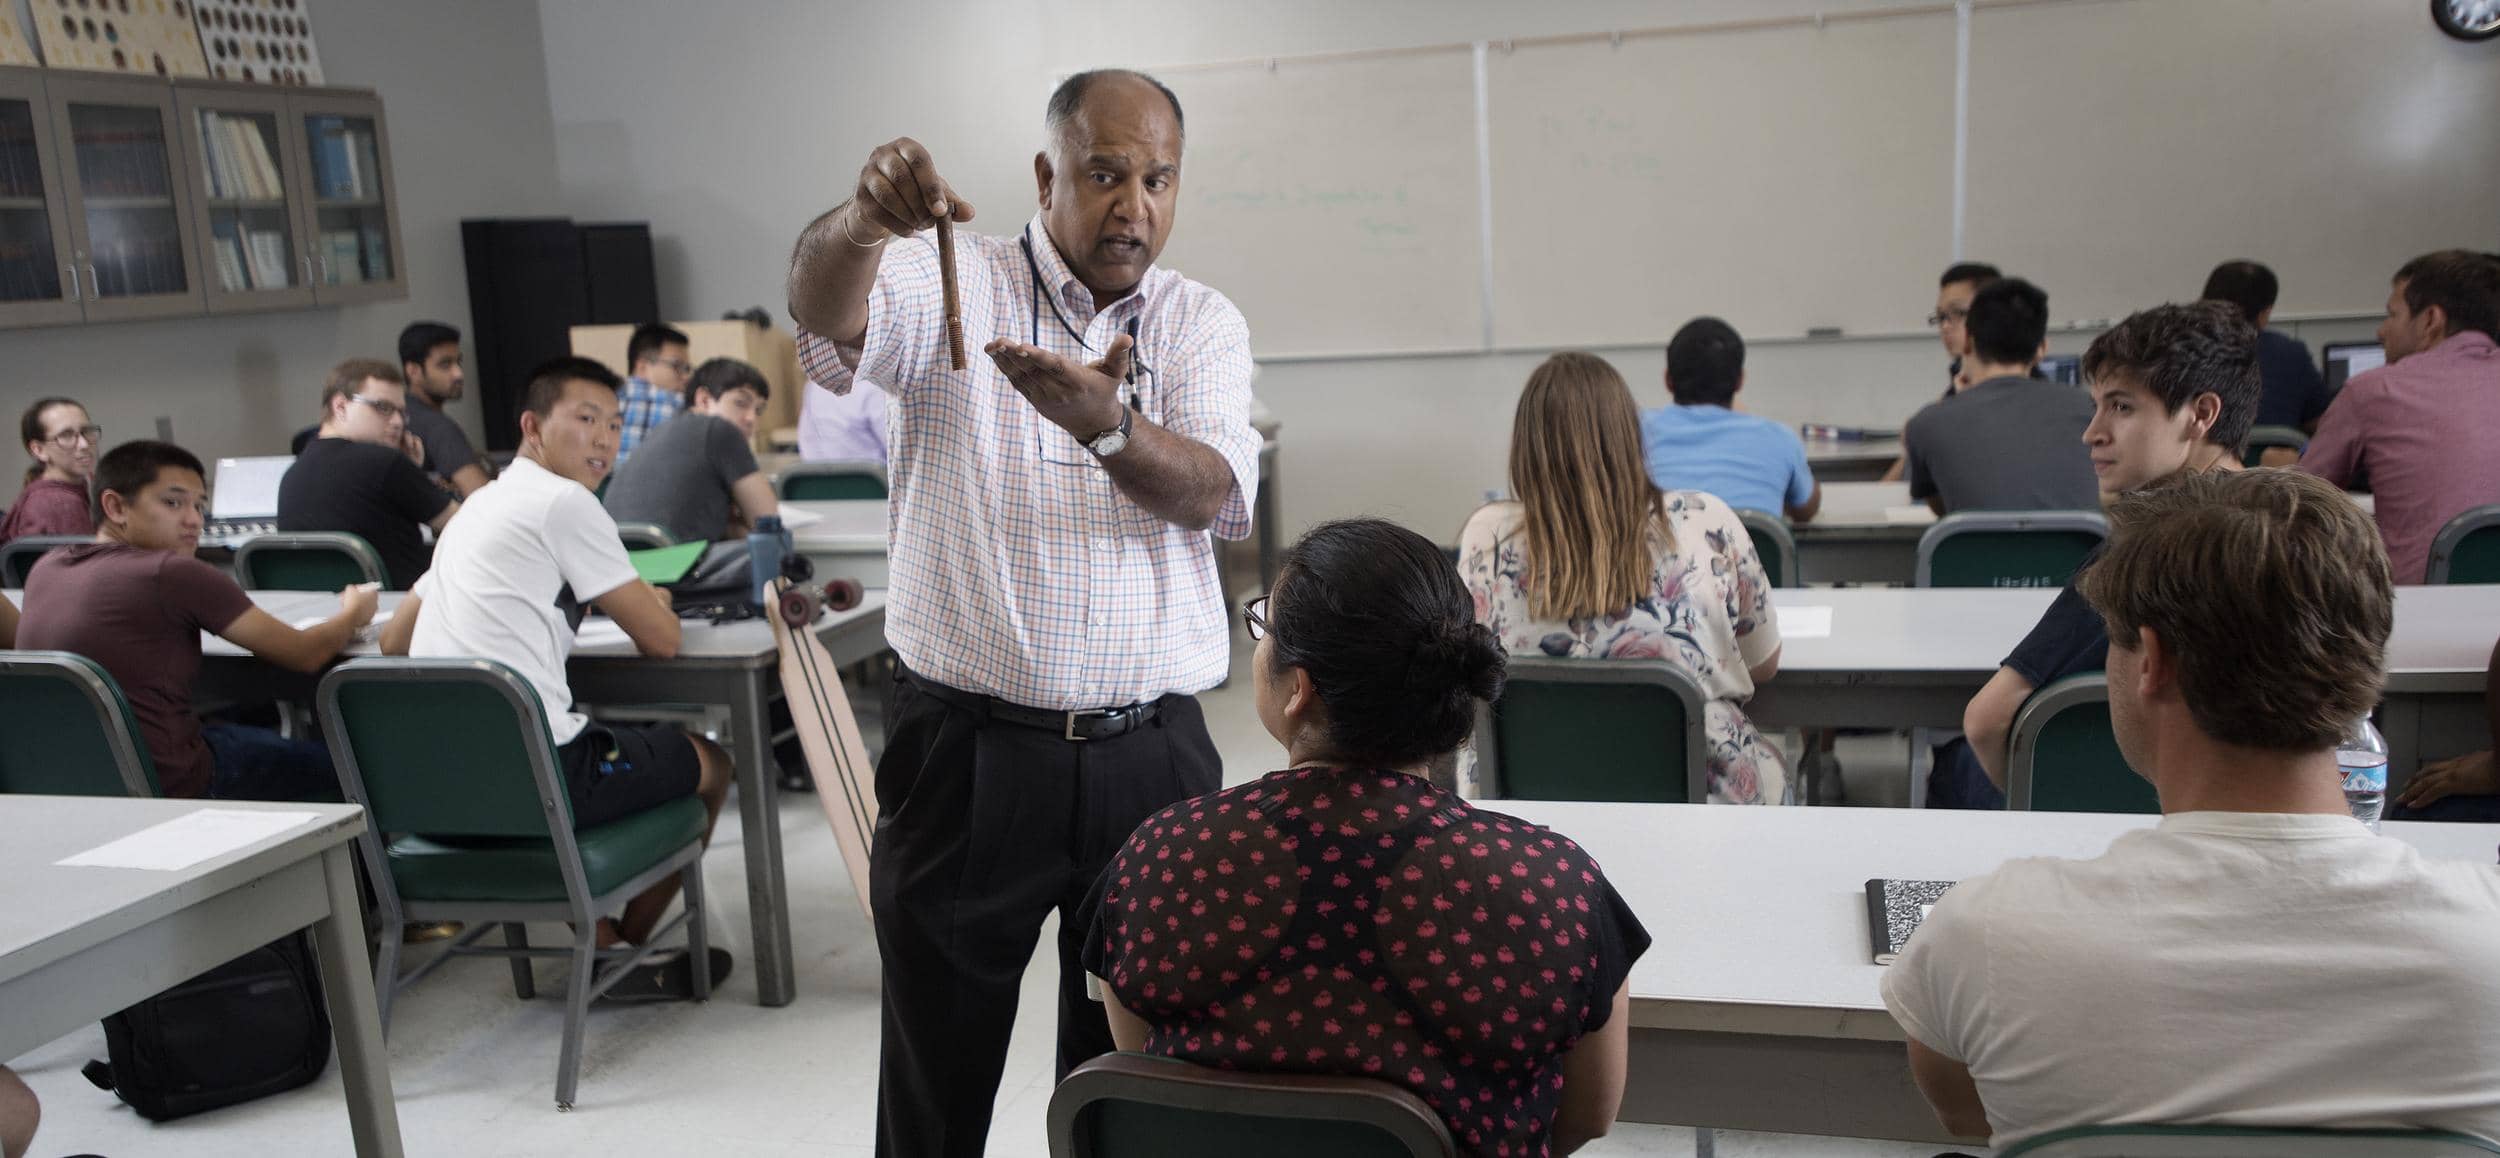 A dark-skinned middle-aged man teaching a classroom full of students.